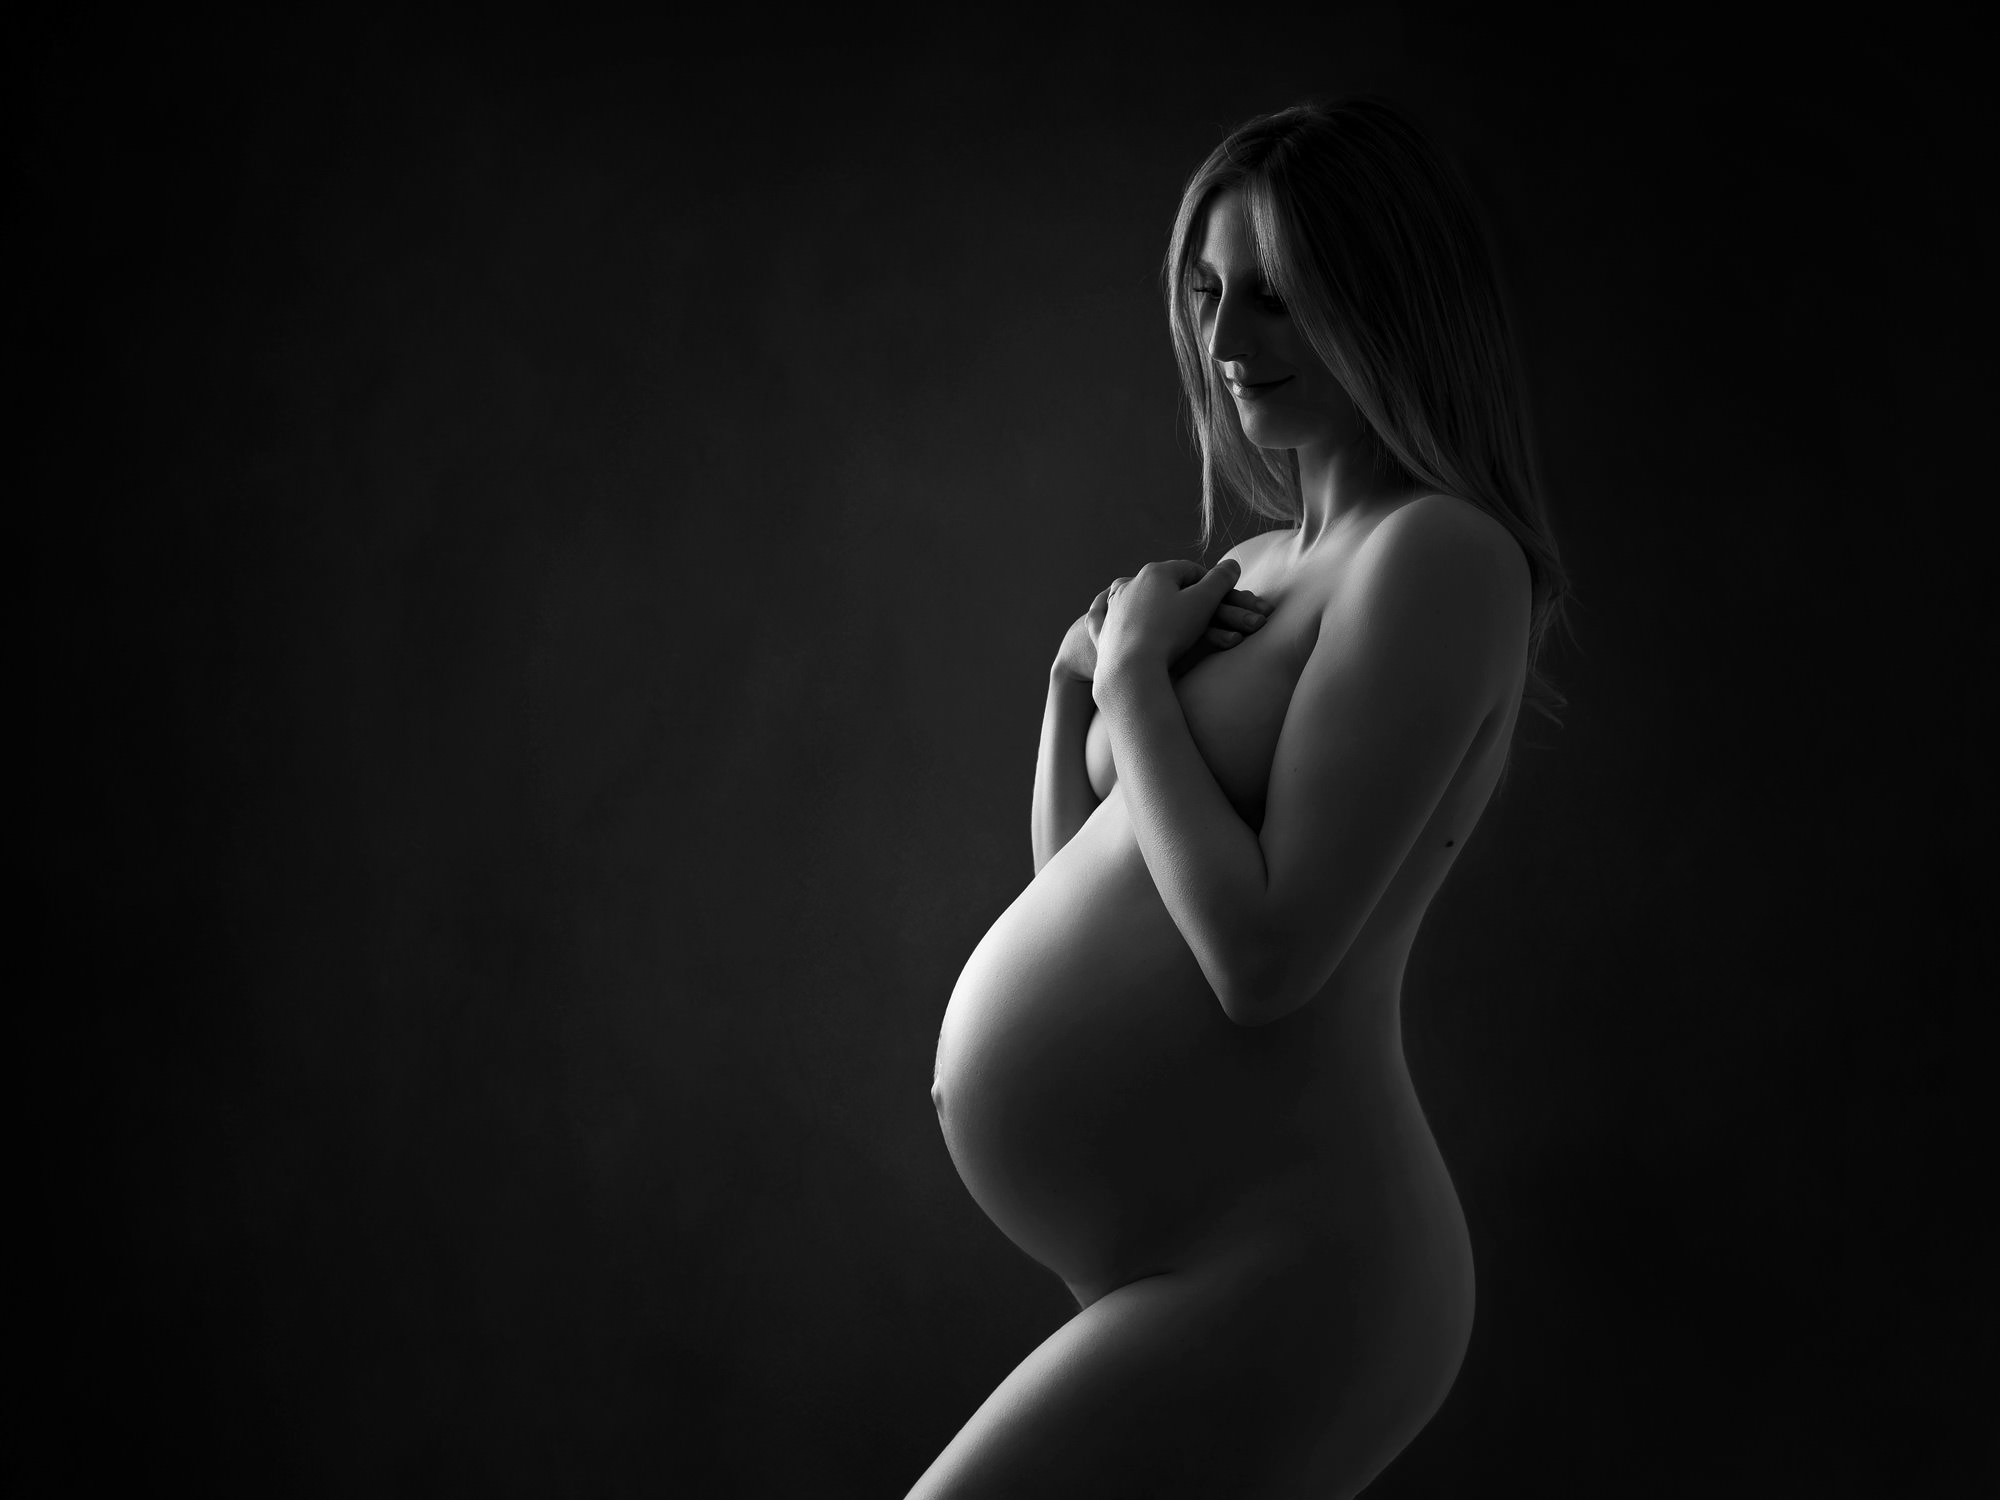 Pregnant lady in silhouette against a black background by maternity photographer in Surrey